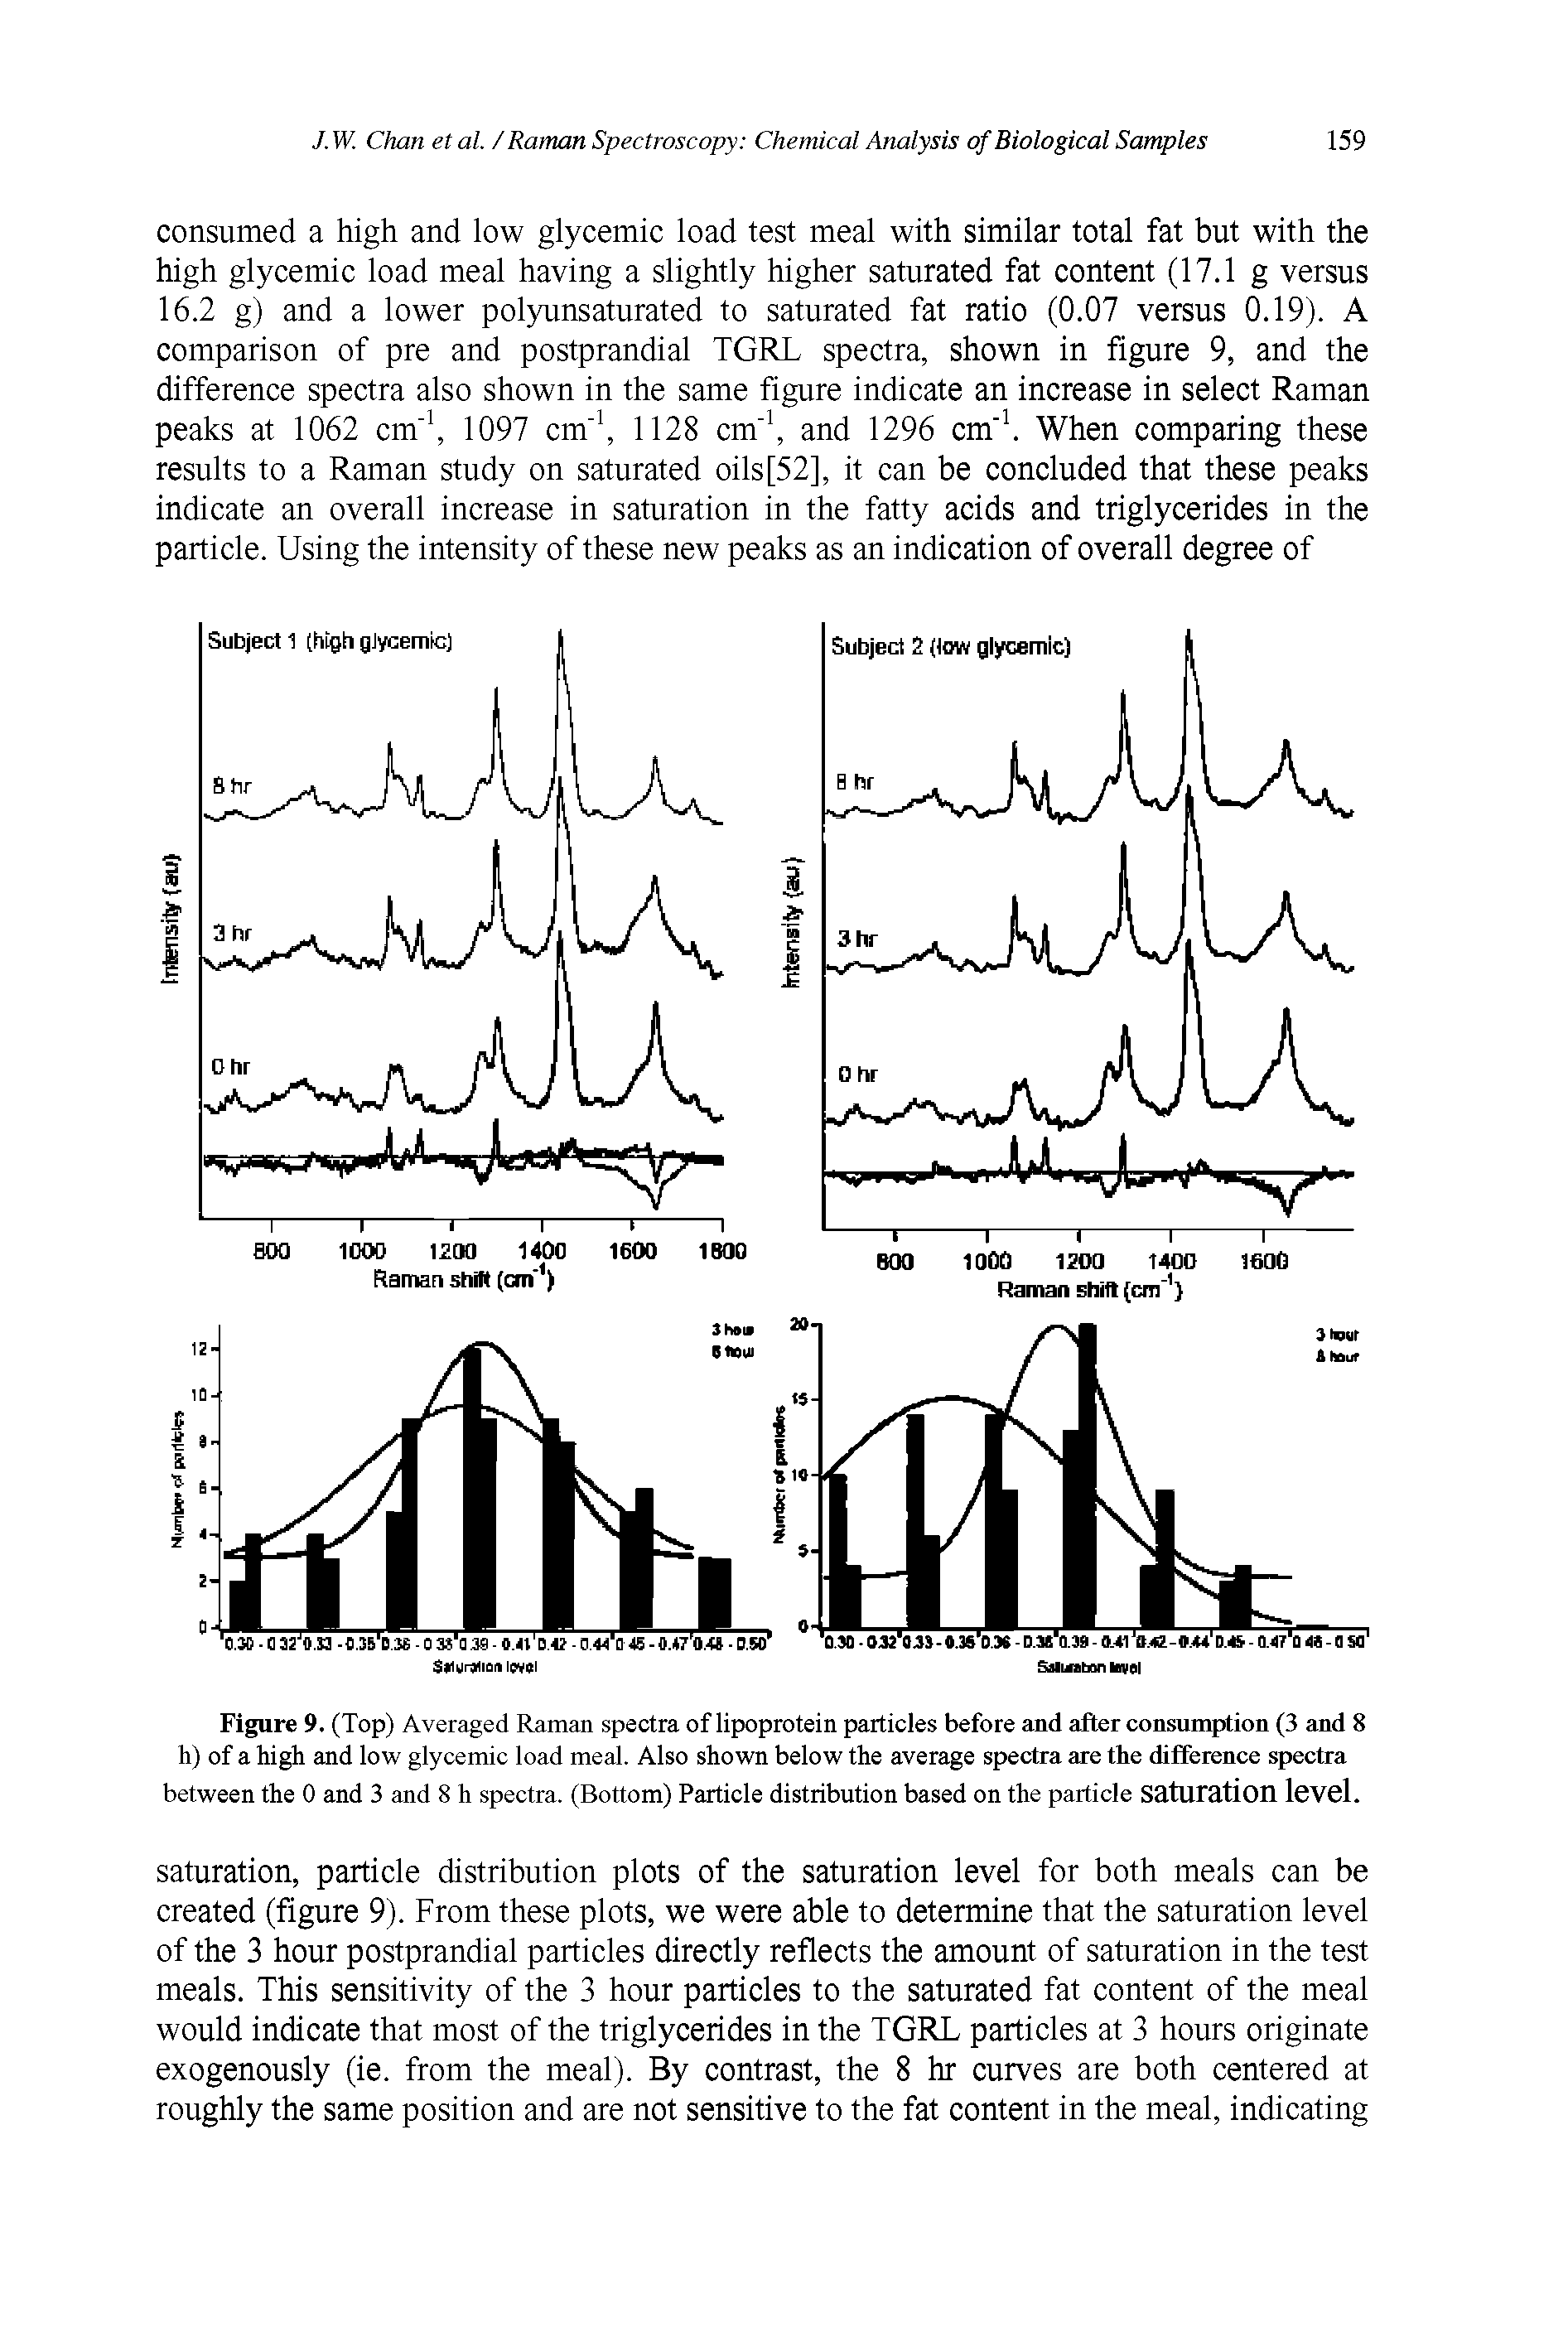 Figure 9. (Top) Averaged Raman spectra of lipoprotein particles before and after consumption (3 and 8 h) of a hi and low glycemic load meal. Also shown below the average spectra are the difference spectra between the 0 and 3 and 8 h spectra. (Bottom) Particle distribution based on the particle Saturation level.